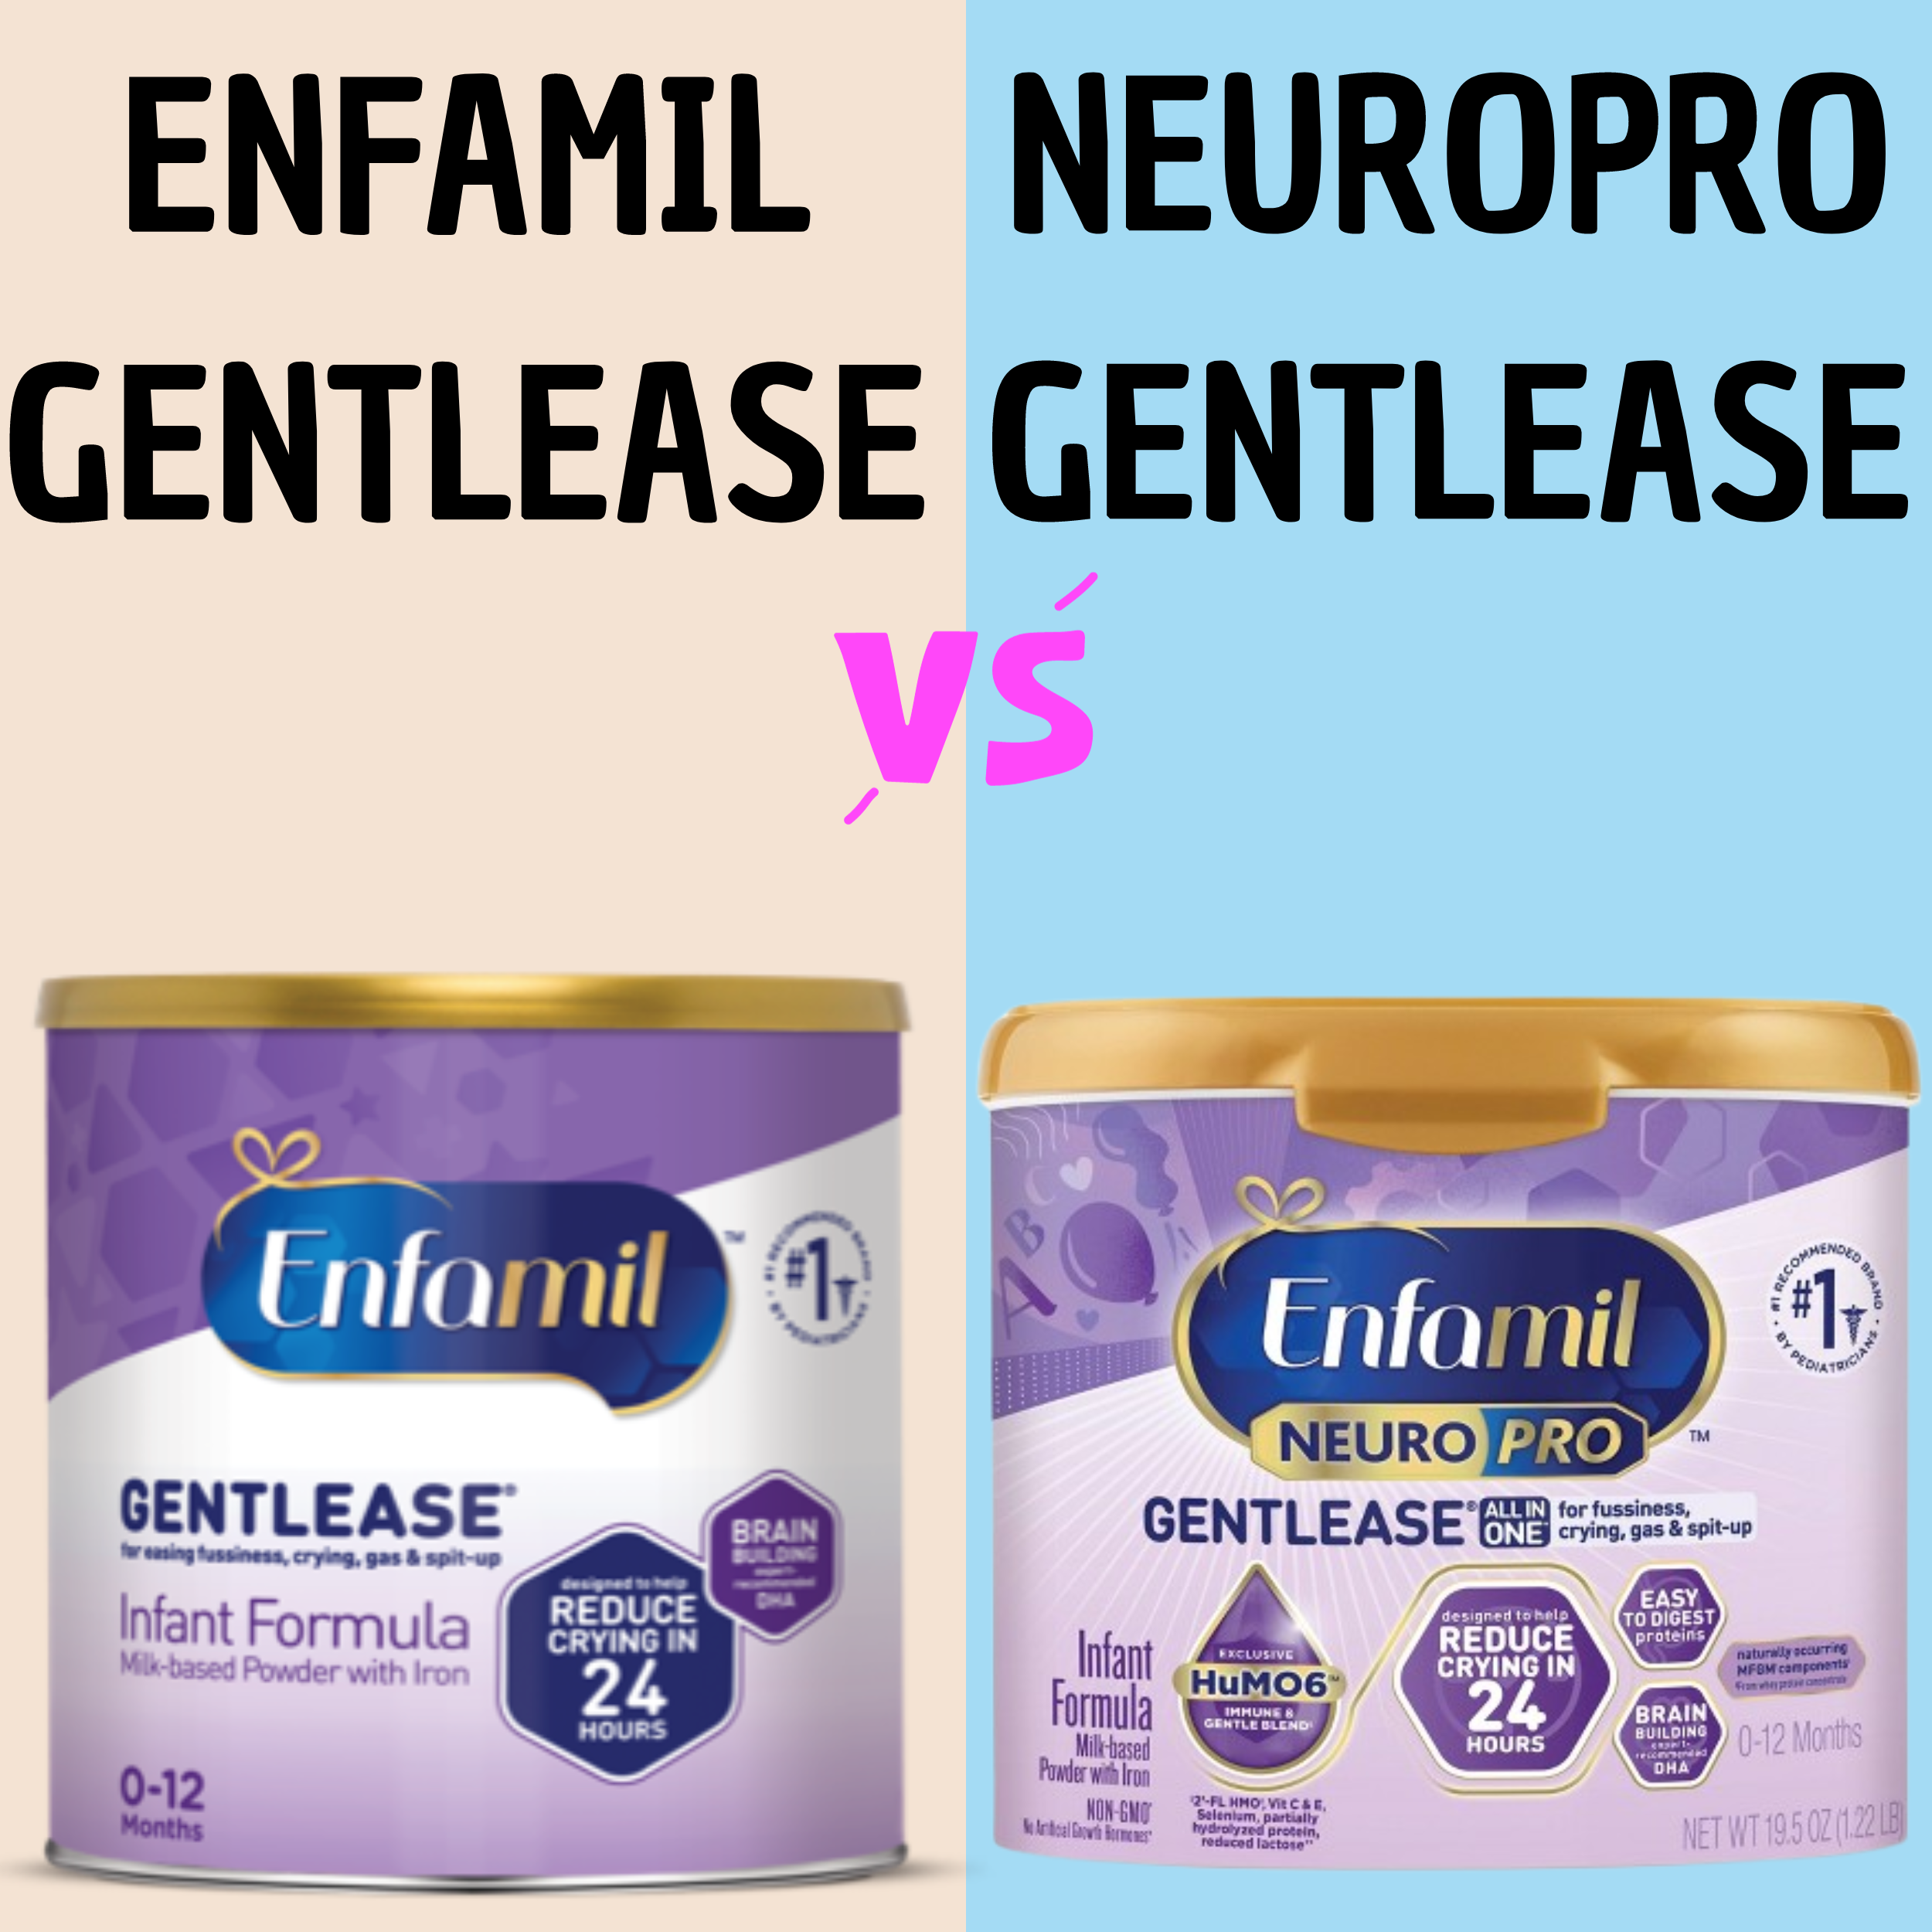 You are currently viewing Enfamil Gentlease Vs Enfamil Neuropro Gentlease: What’s The Difference?